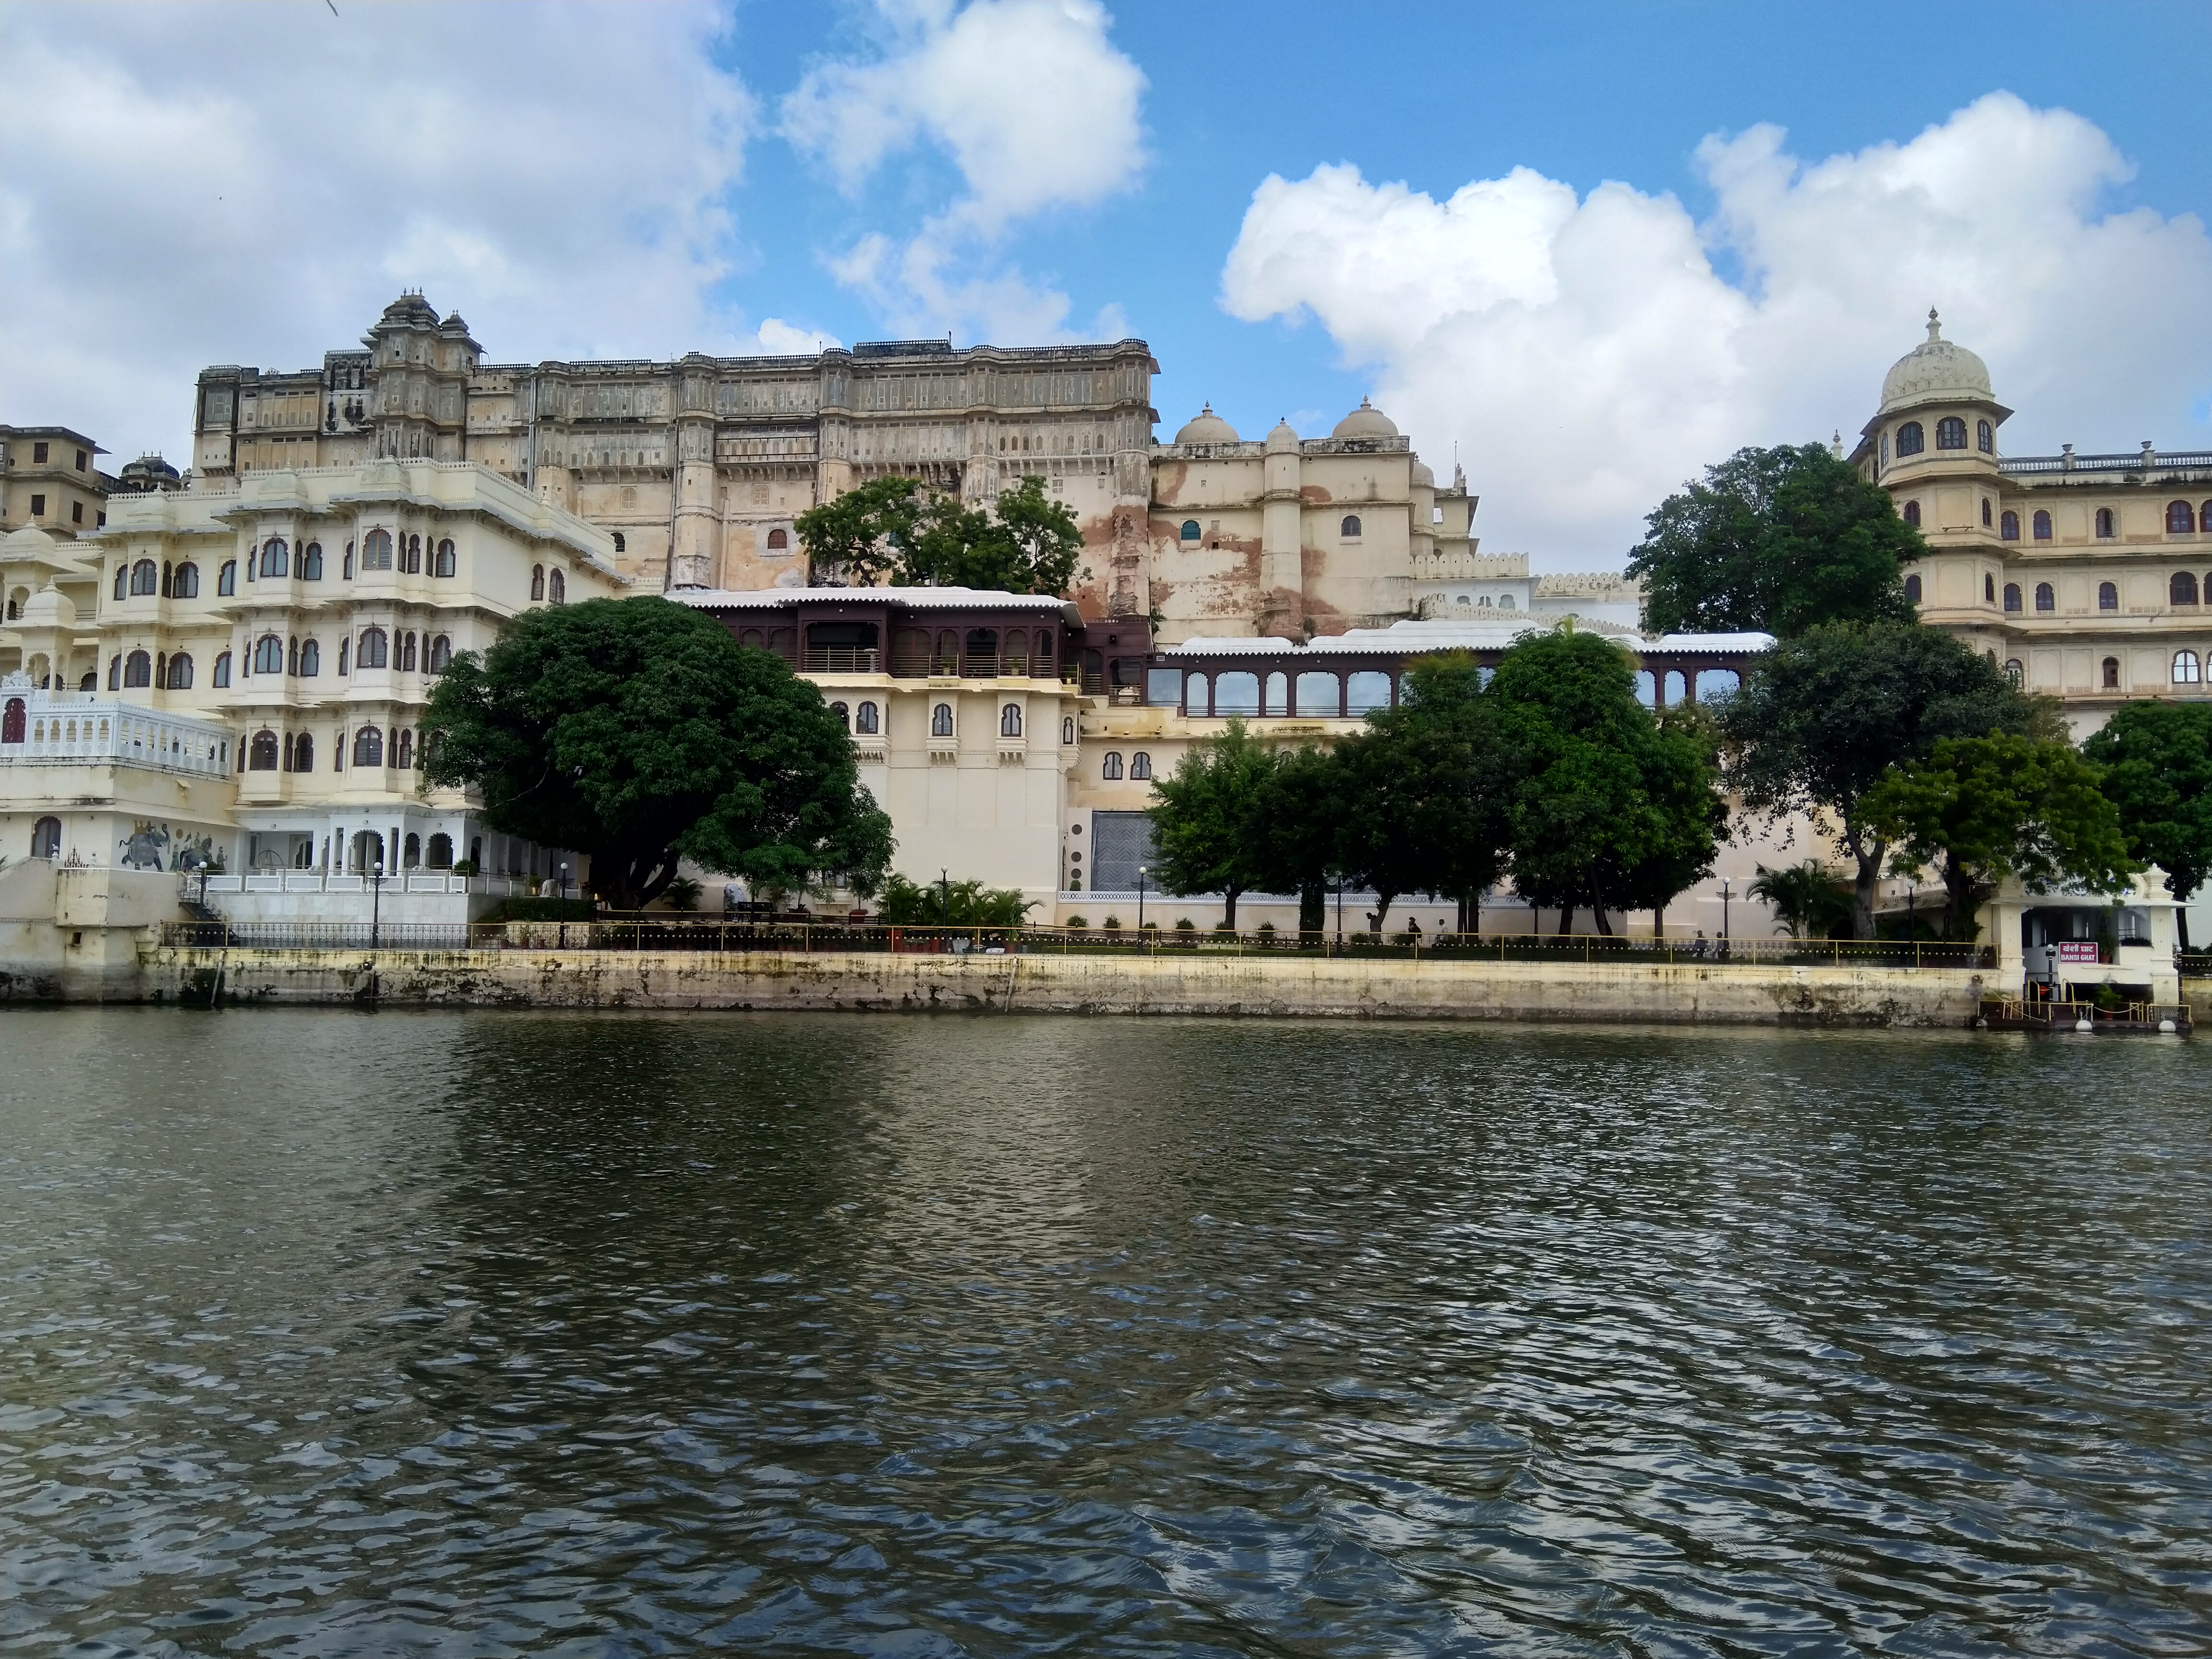 Udaipur - The city of Lakes